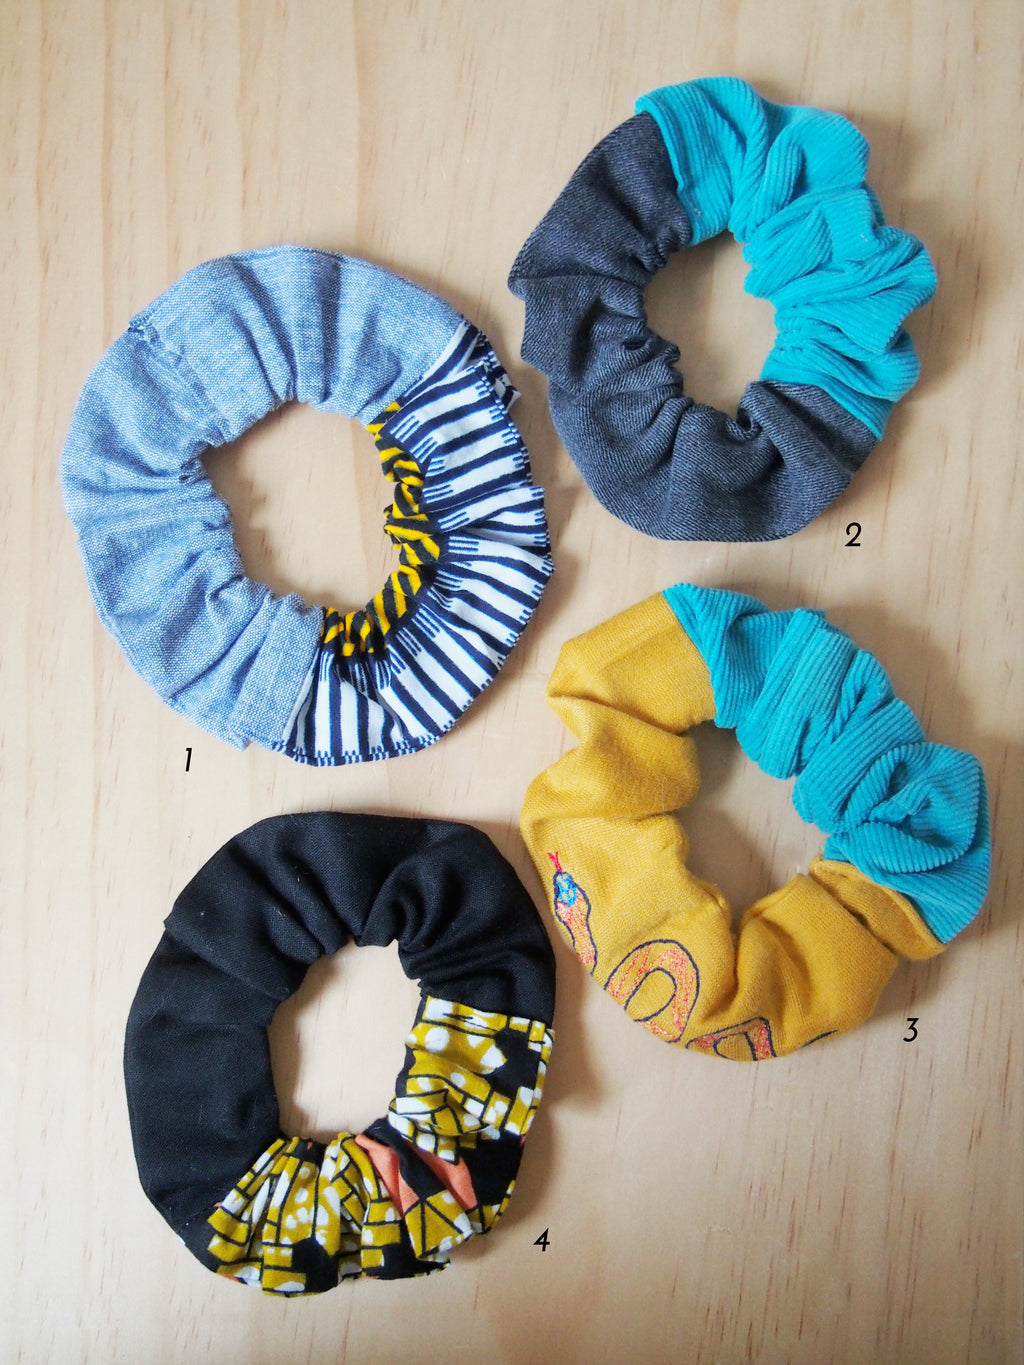 Charity Scrunchies part 1